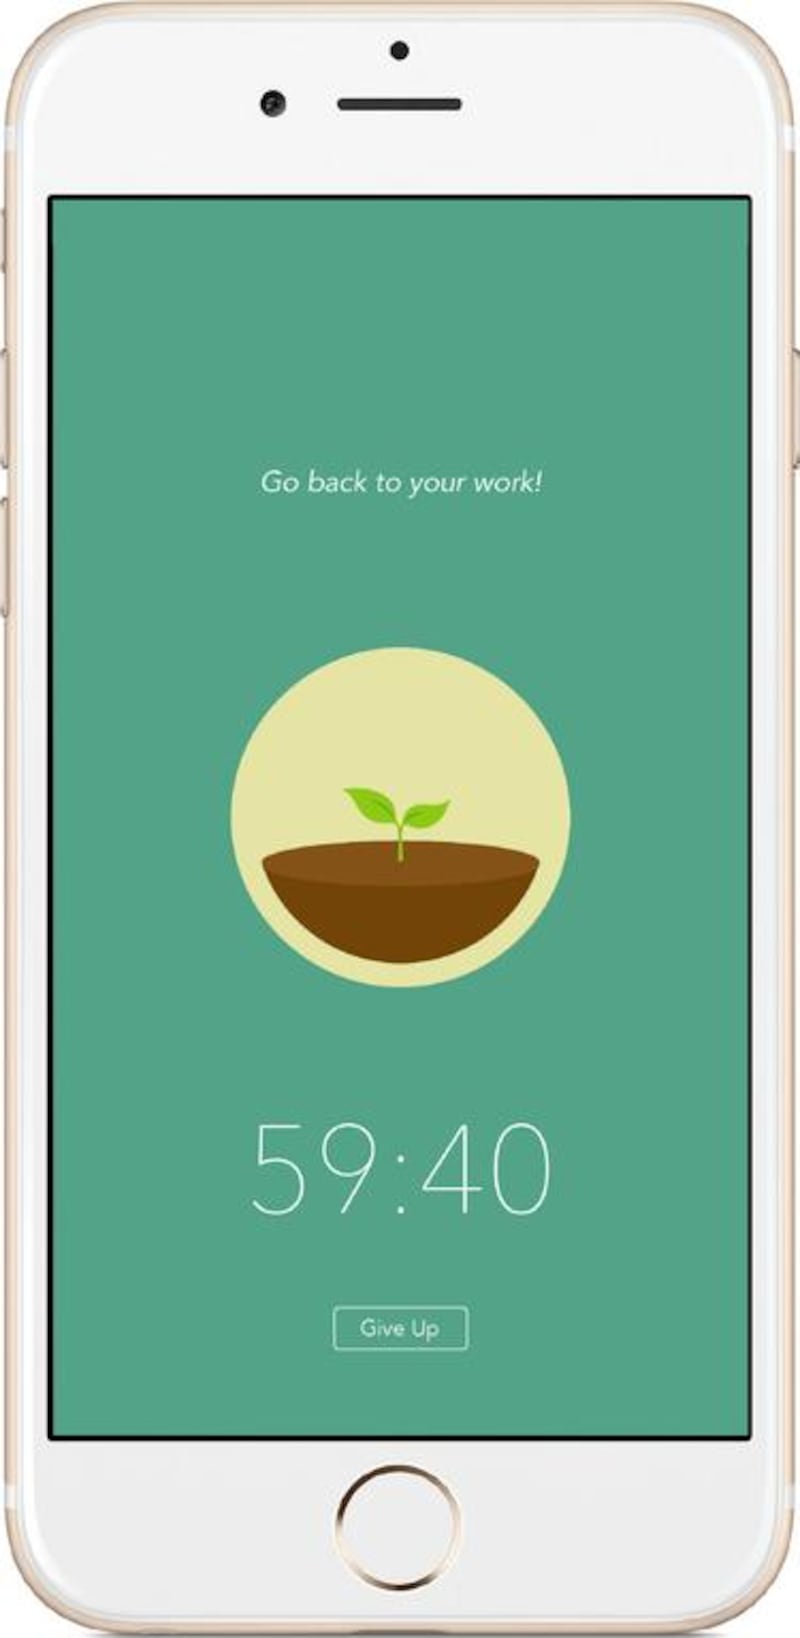 Forest is an app to help you reclaim your time and stay in the present. Courtesy forestapp.cc